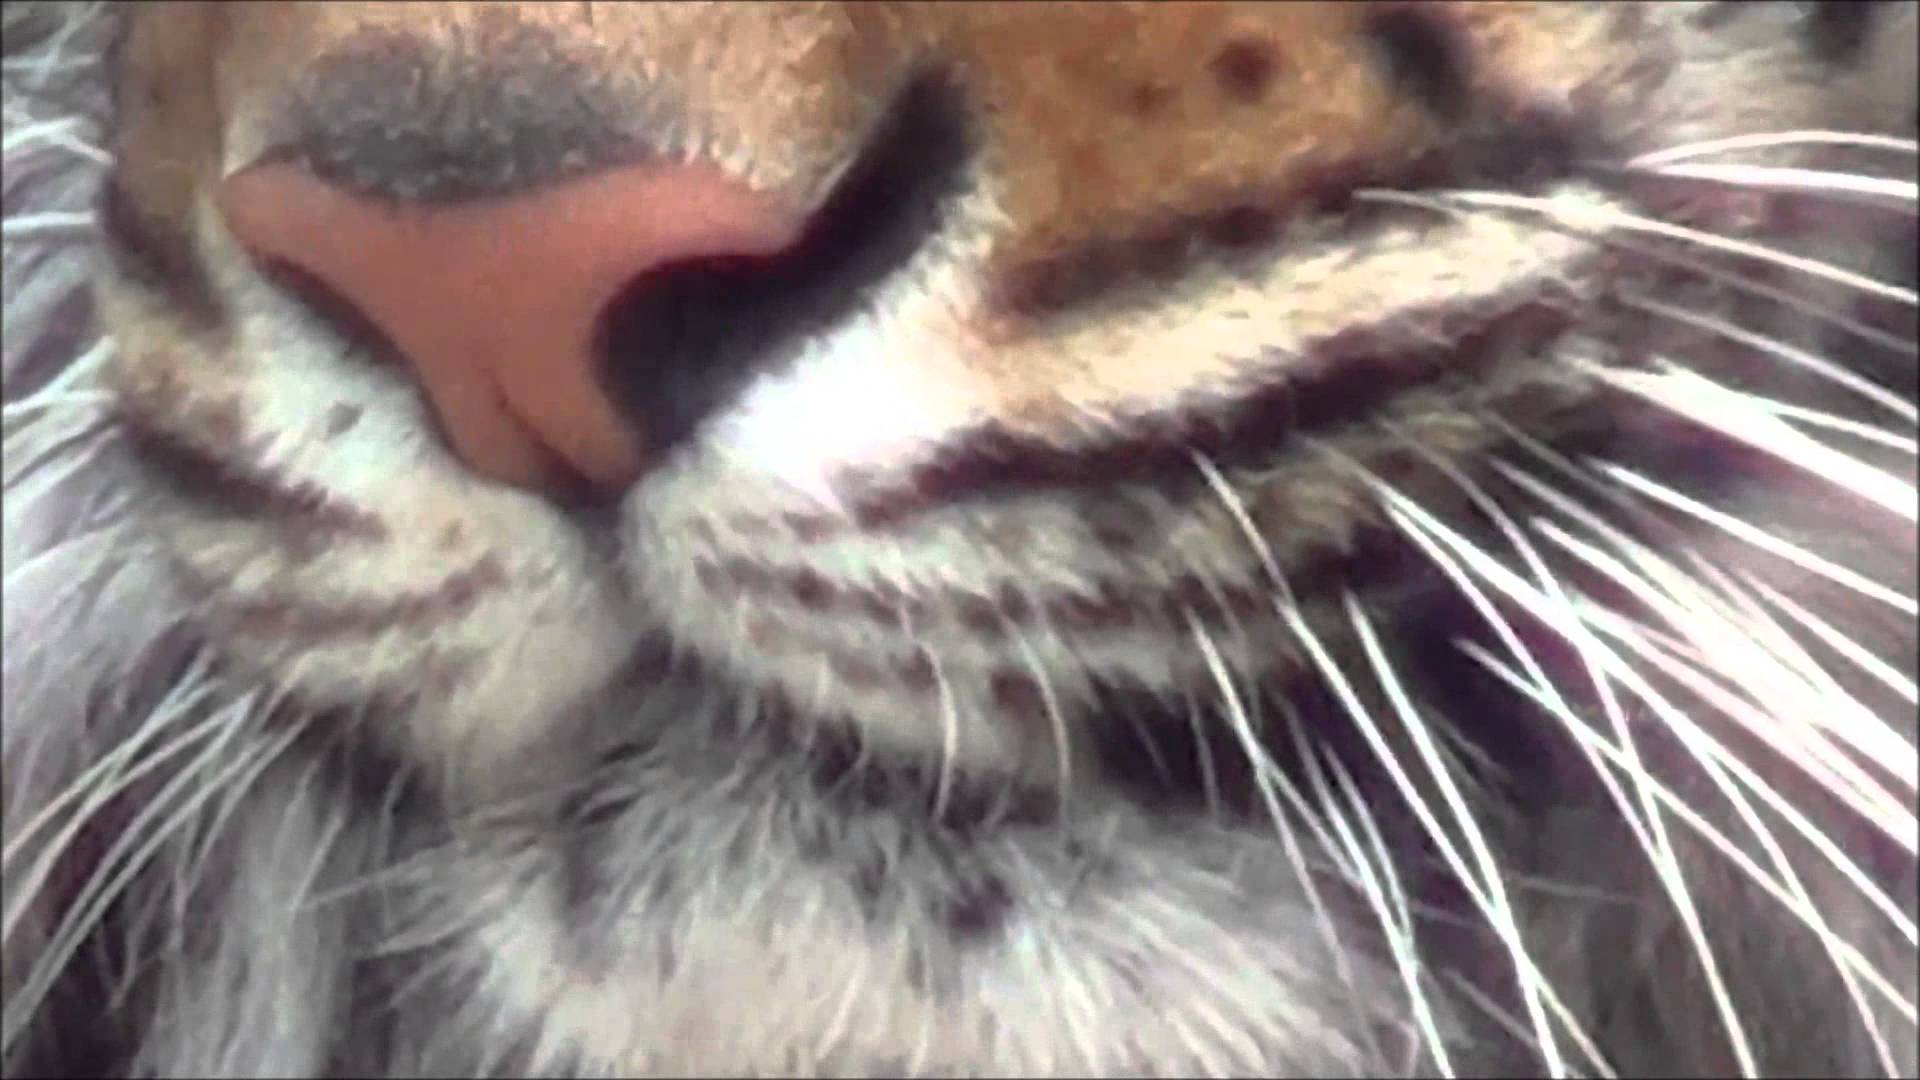 watch AMAZING BENGAL TIGER video CLOSE UP in HD - YouTube